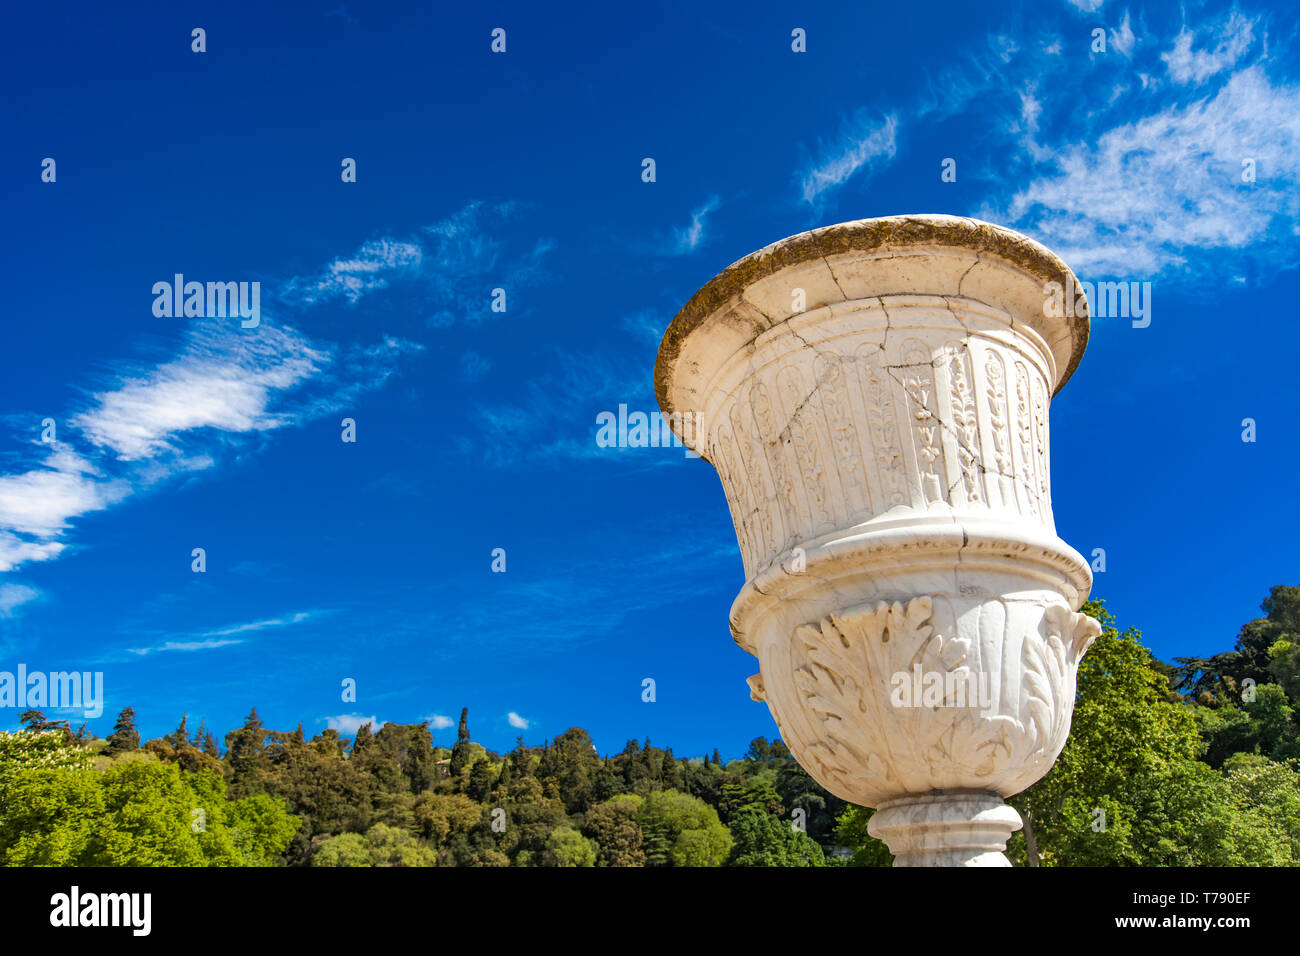 Statue of vase from Les Jardins de La Fontaine in Nimes, France Stock Photo